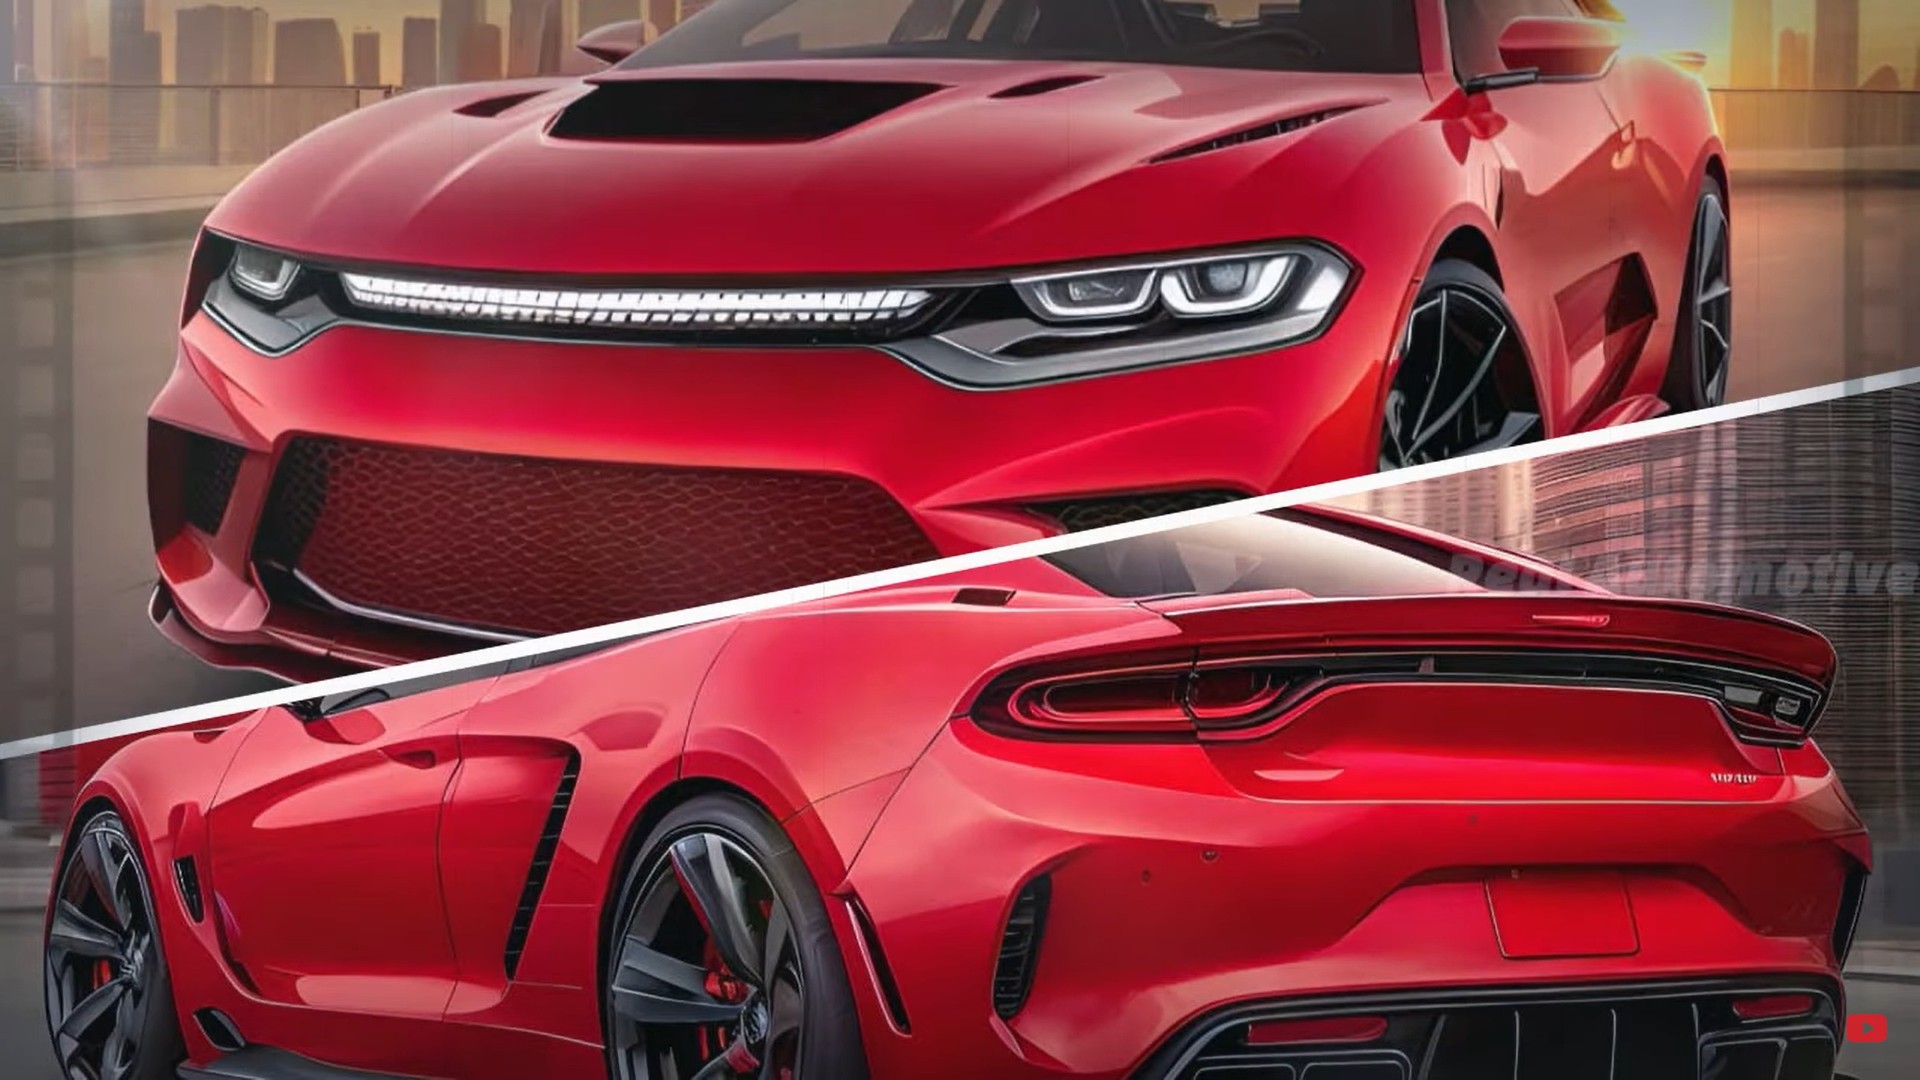 https://s1.cdn.autoevolution.com/images/news/unofficial-2025-dodge-charger-reveal-shows-everything-it-has-nothing-to-do-with-reality-226138_1.jpg